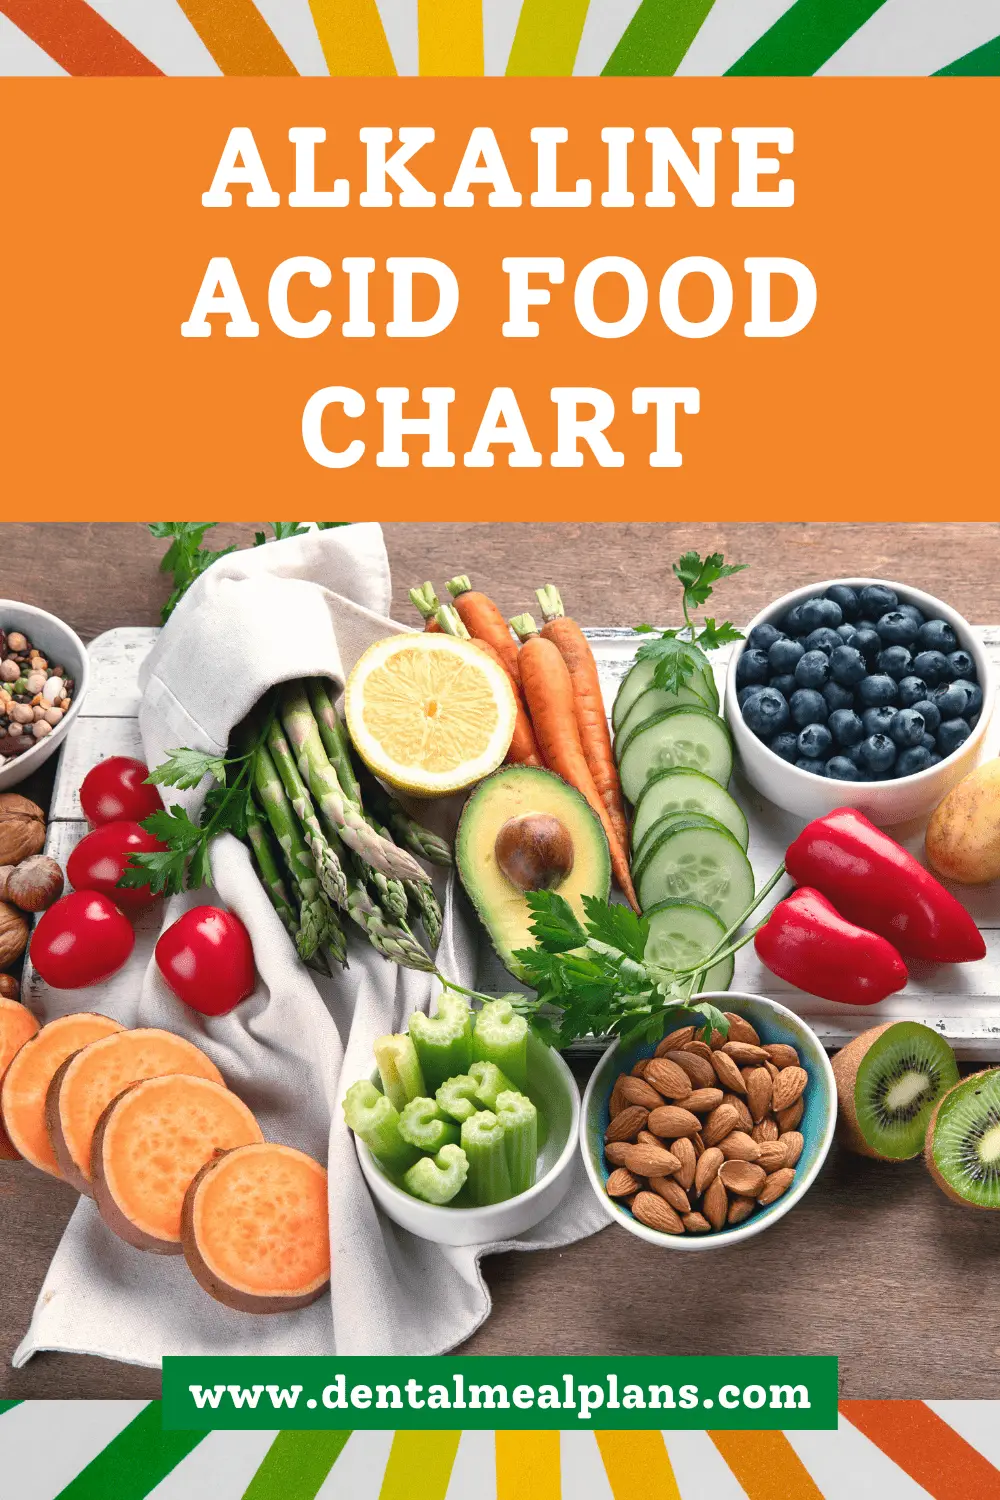 alkaline acid food chart image with pH scale and a picture with a variety of healthy food